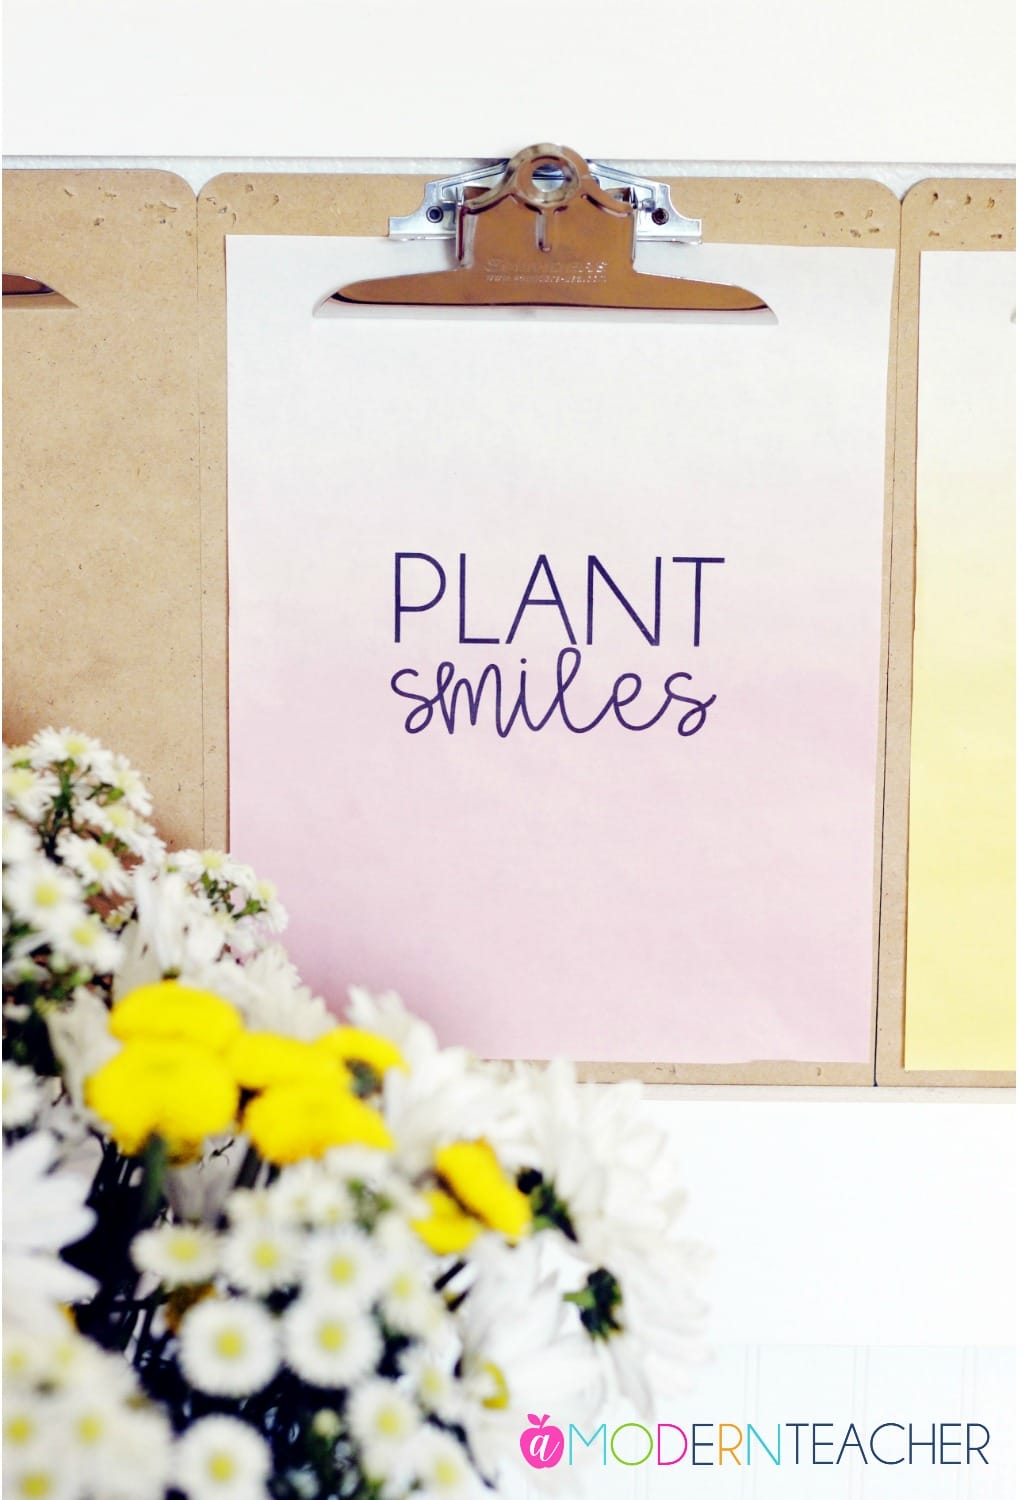 Add a little touch of nature inside with this free printable; spruce up your gallery wall for year round inspiration! Simple sayings that inspire.